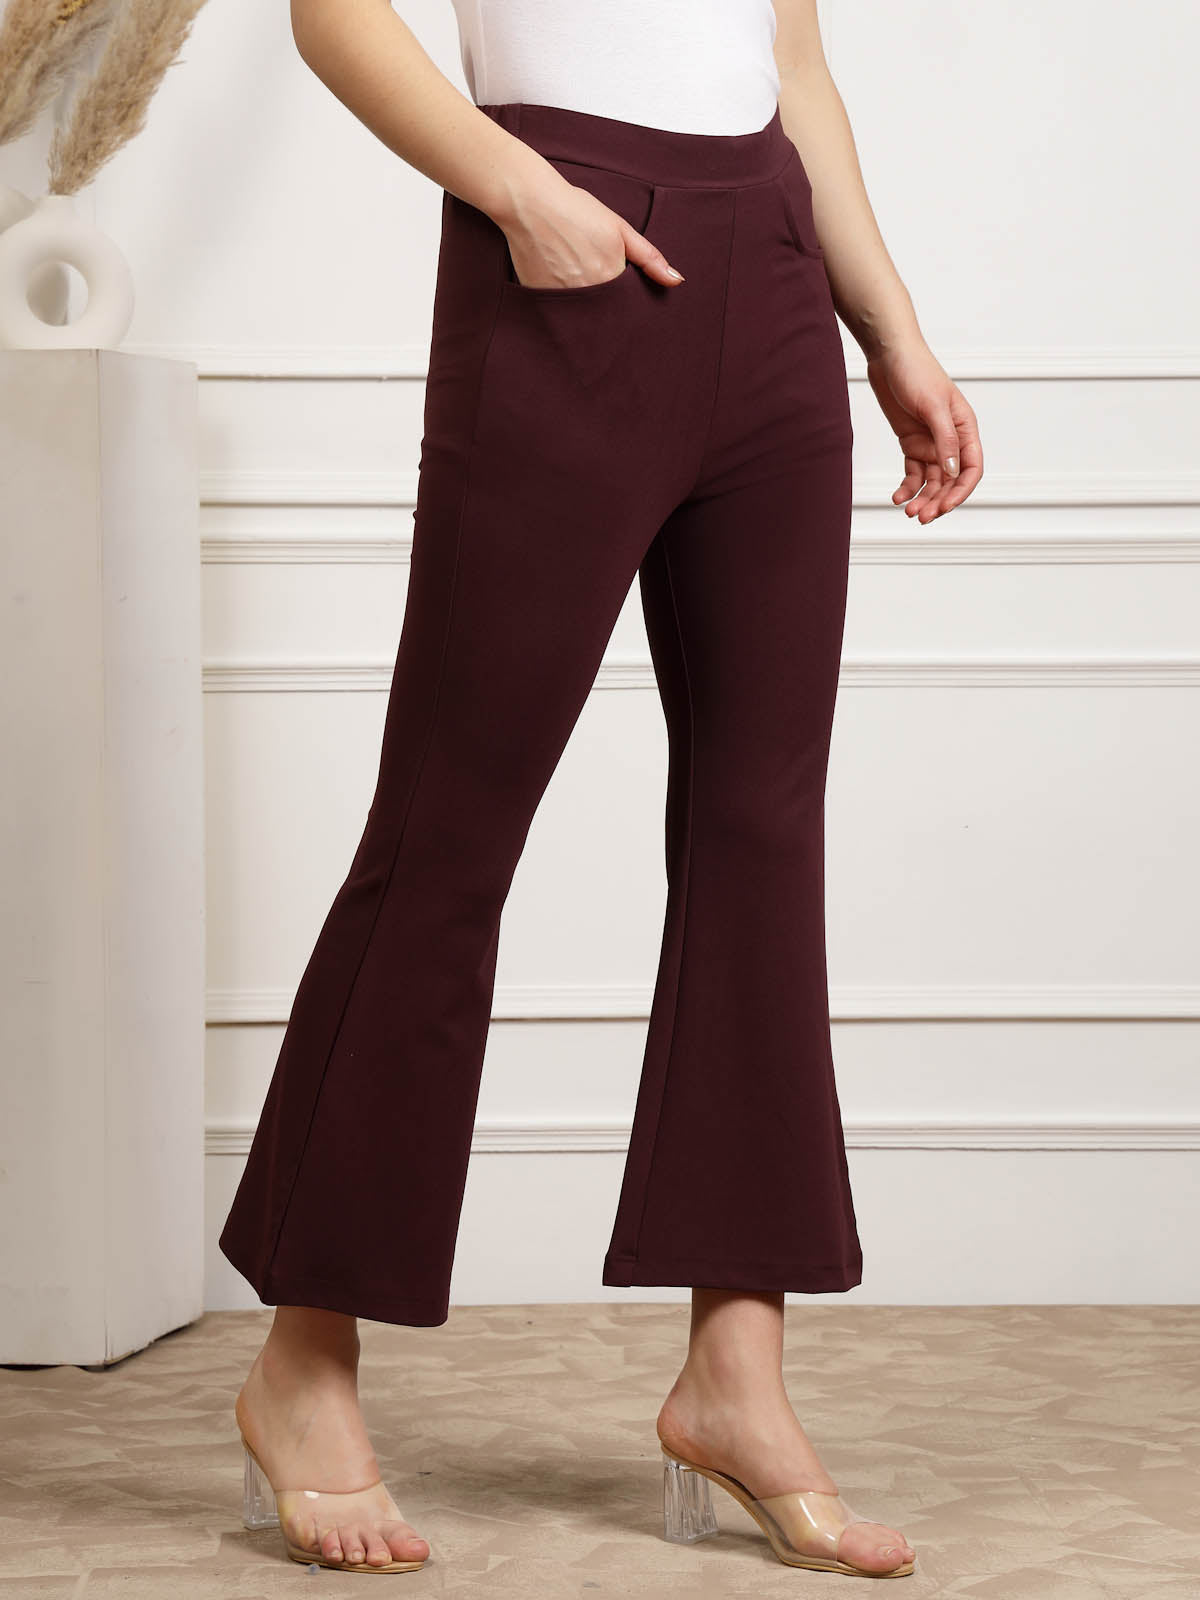 Buy stylemyth Women Cotton Maroon Casual Trousers at Amazon.in